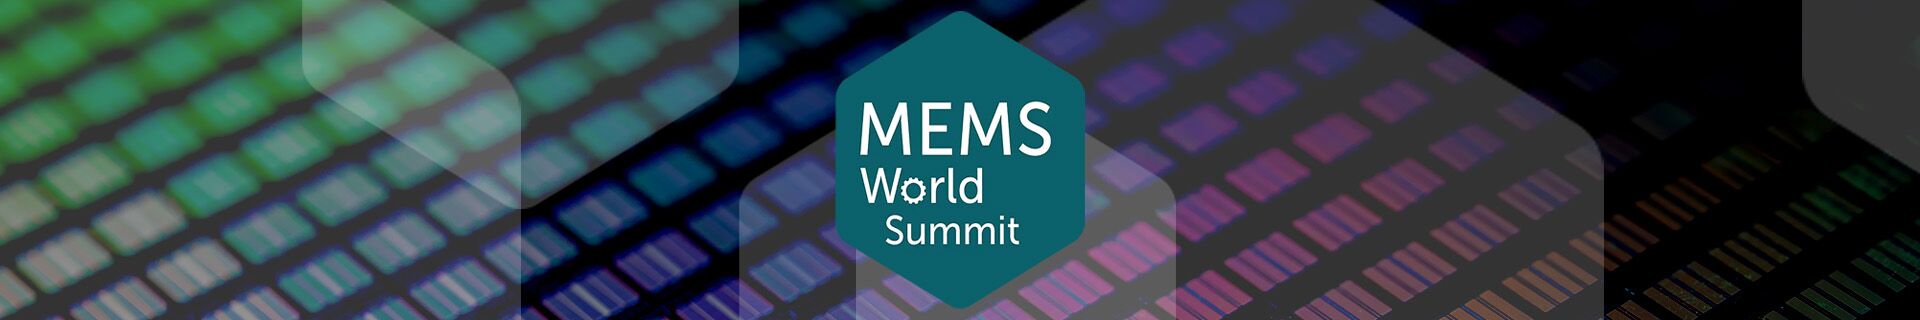 SPEKTRA is a guest at the MEMS World Summit